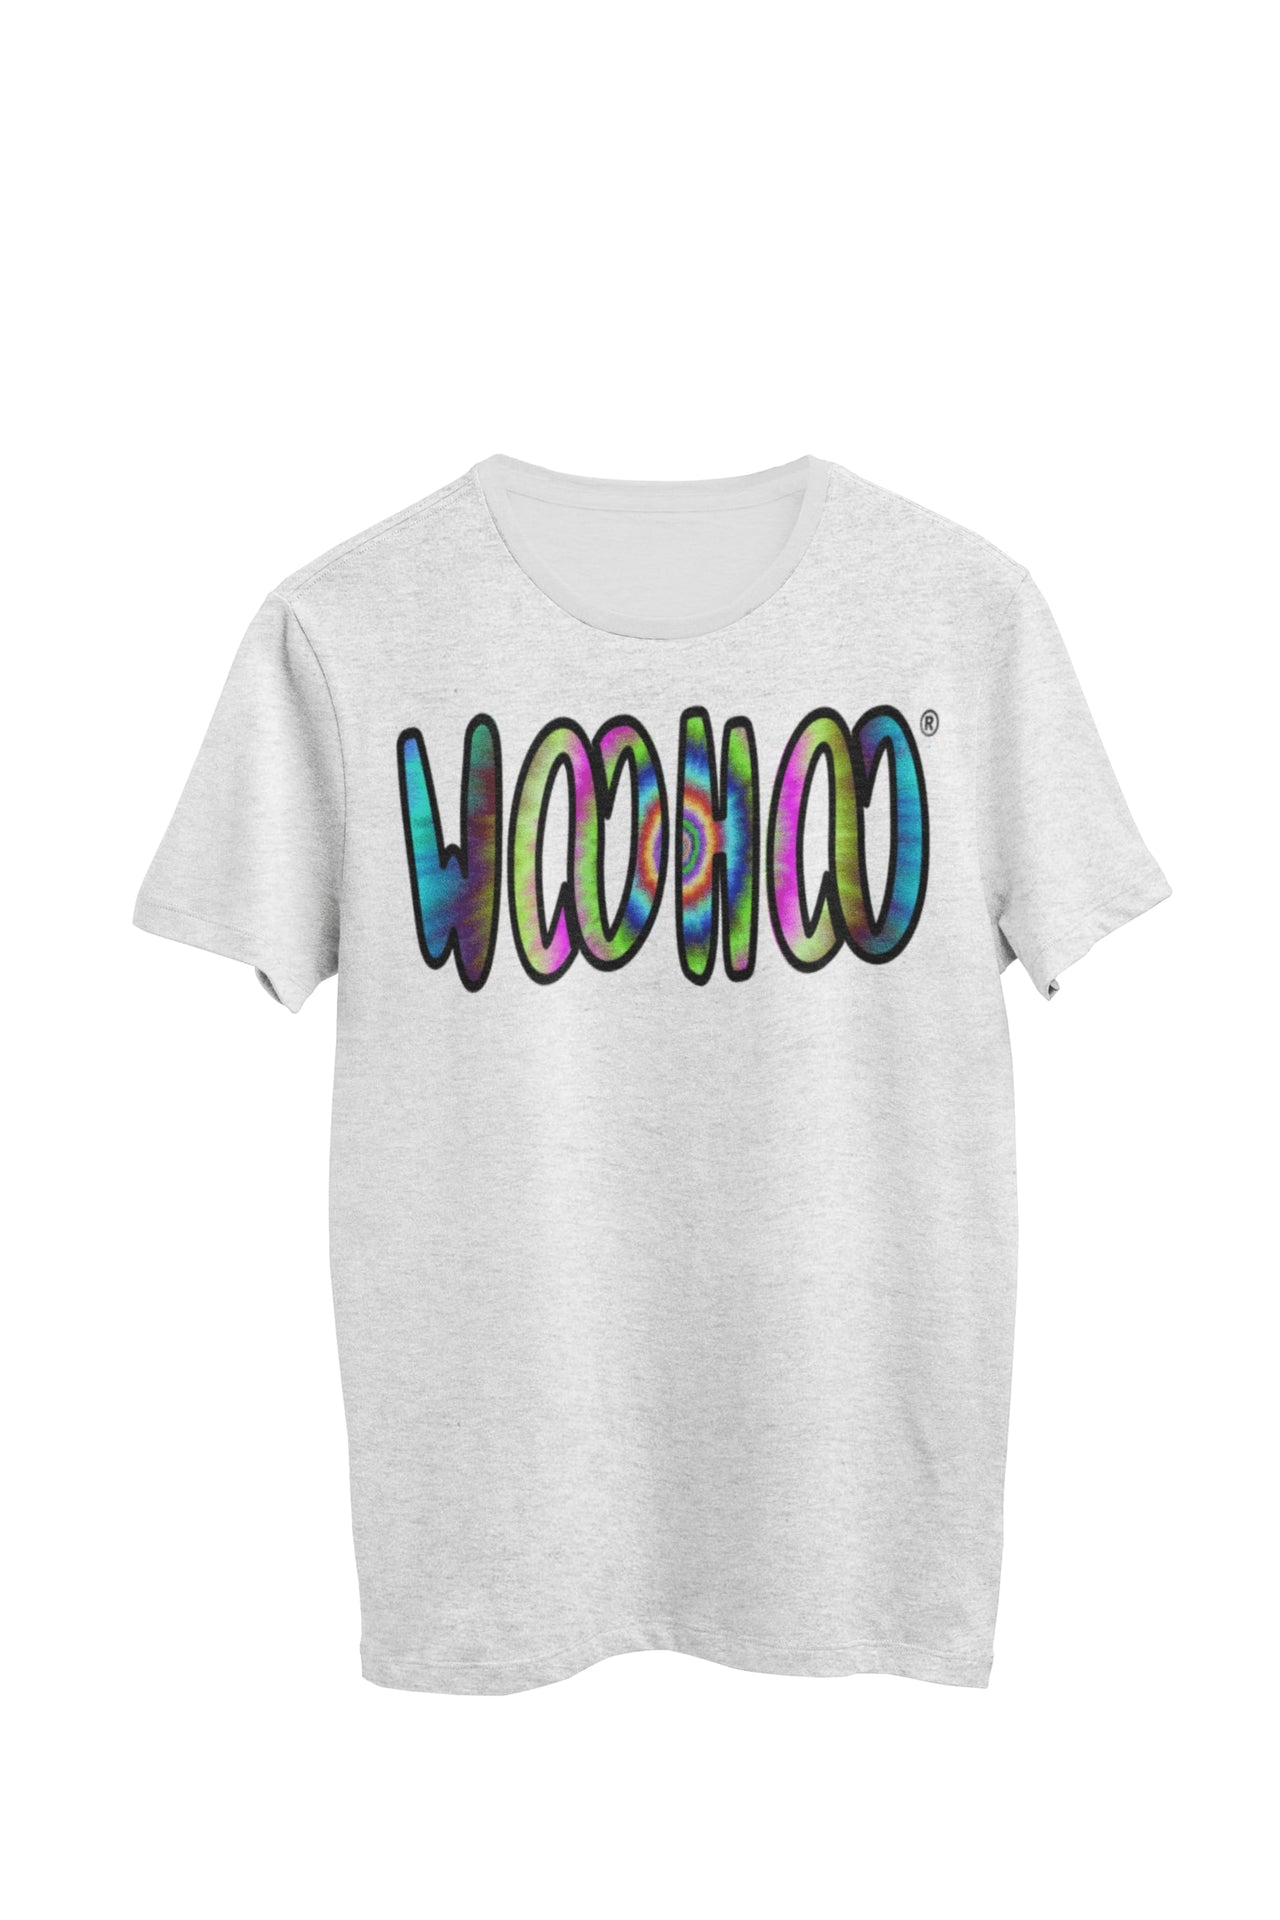 Heather gray unisex t-shirt designed by WooHoo Apparel. The design features a larger 'woohoo' font with tie-dye inside the outline, called bullseye.